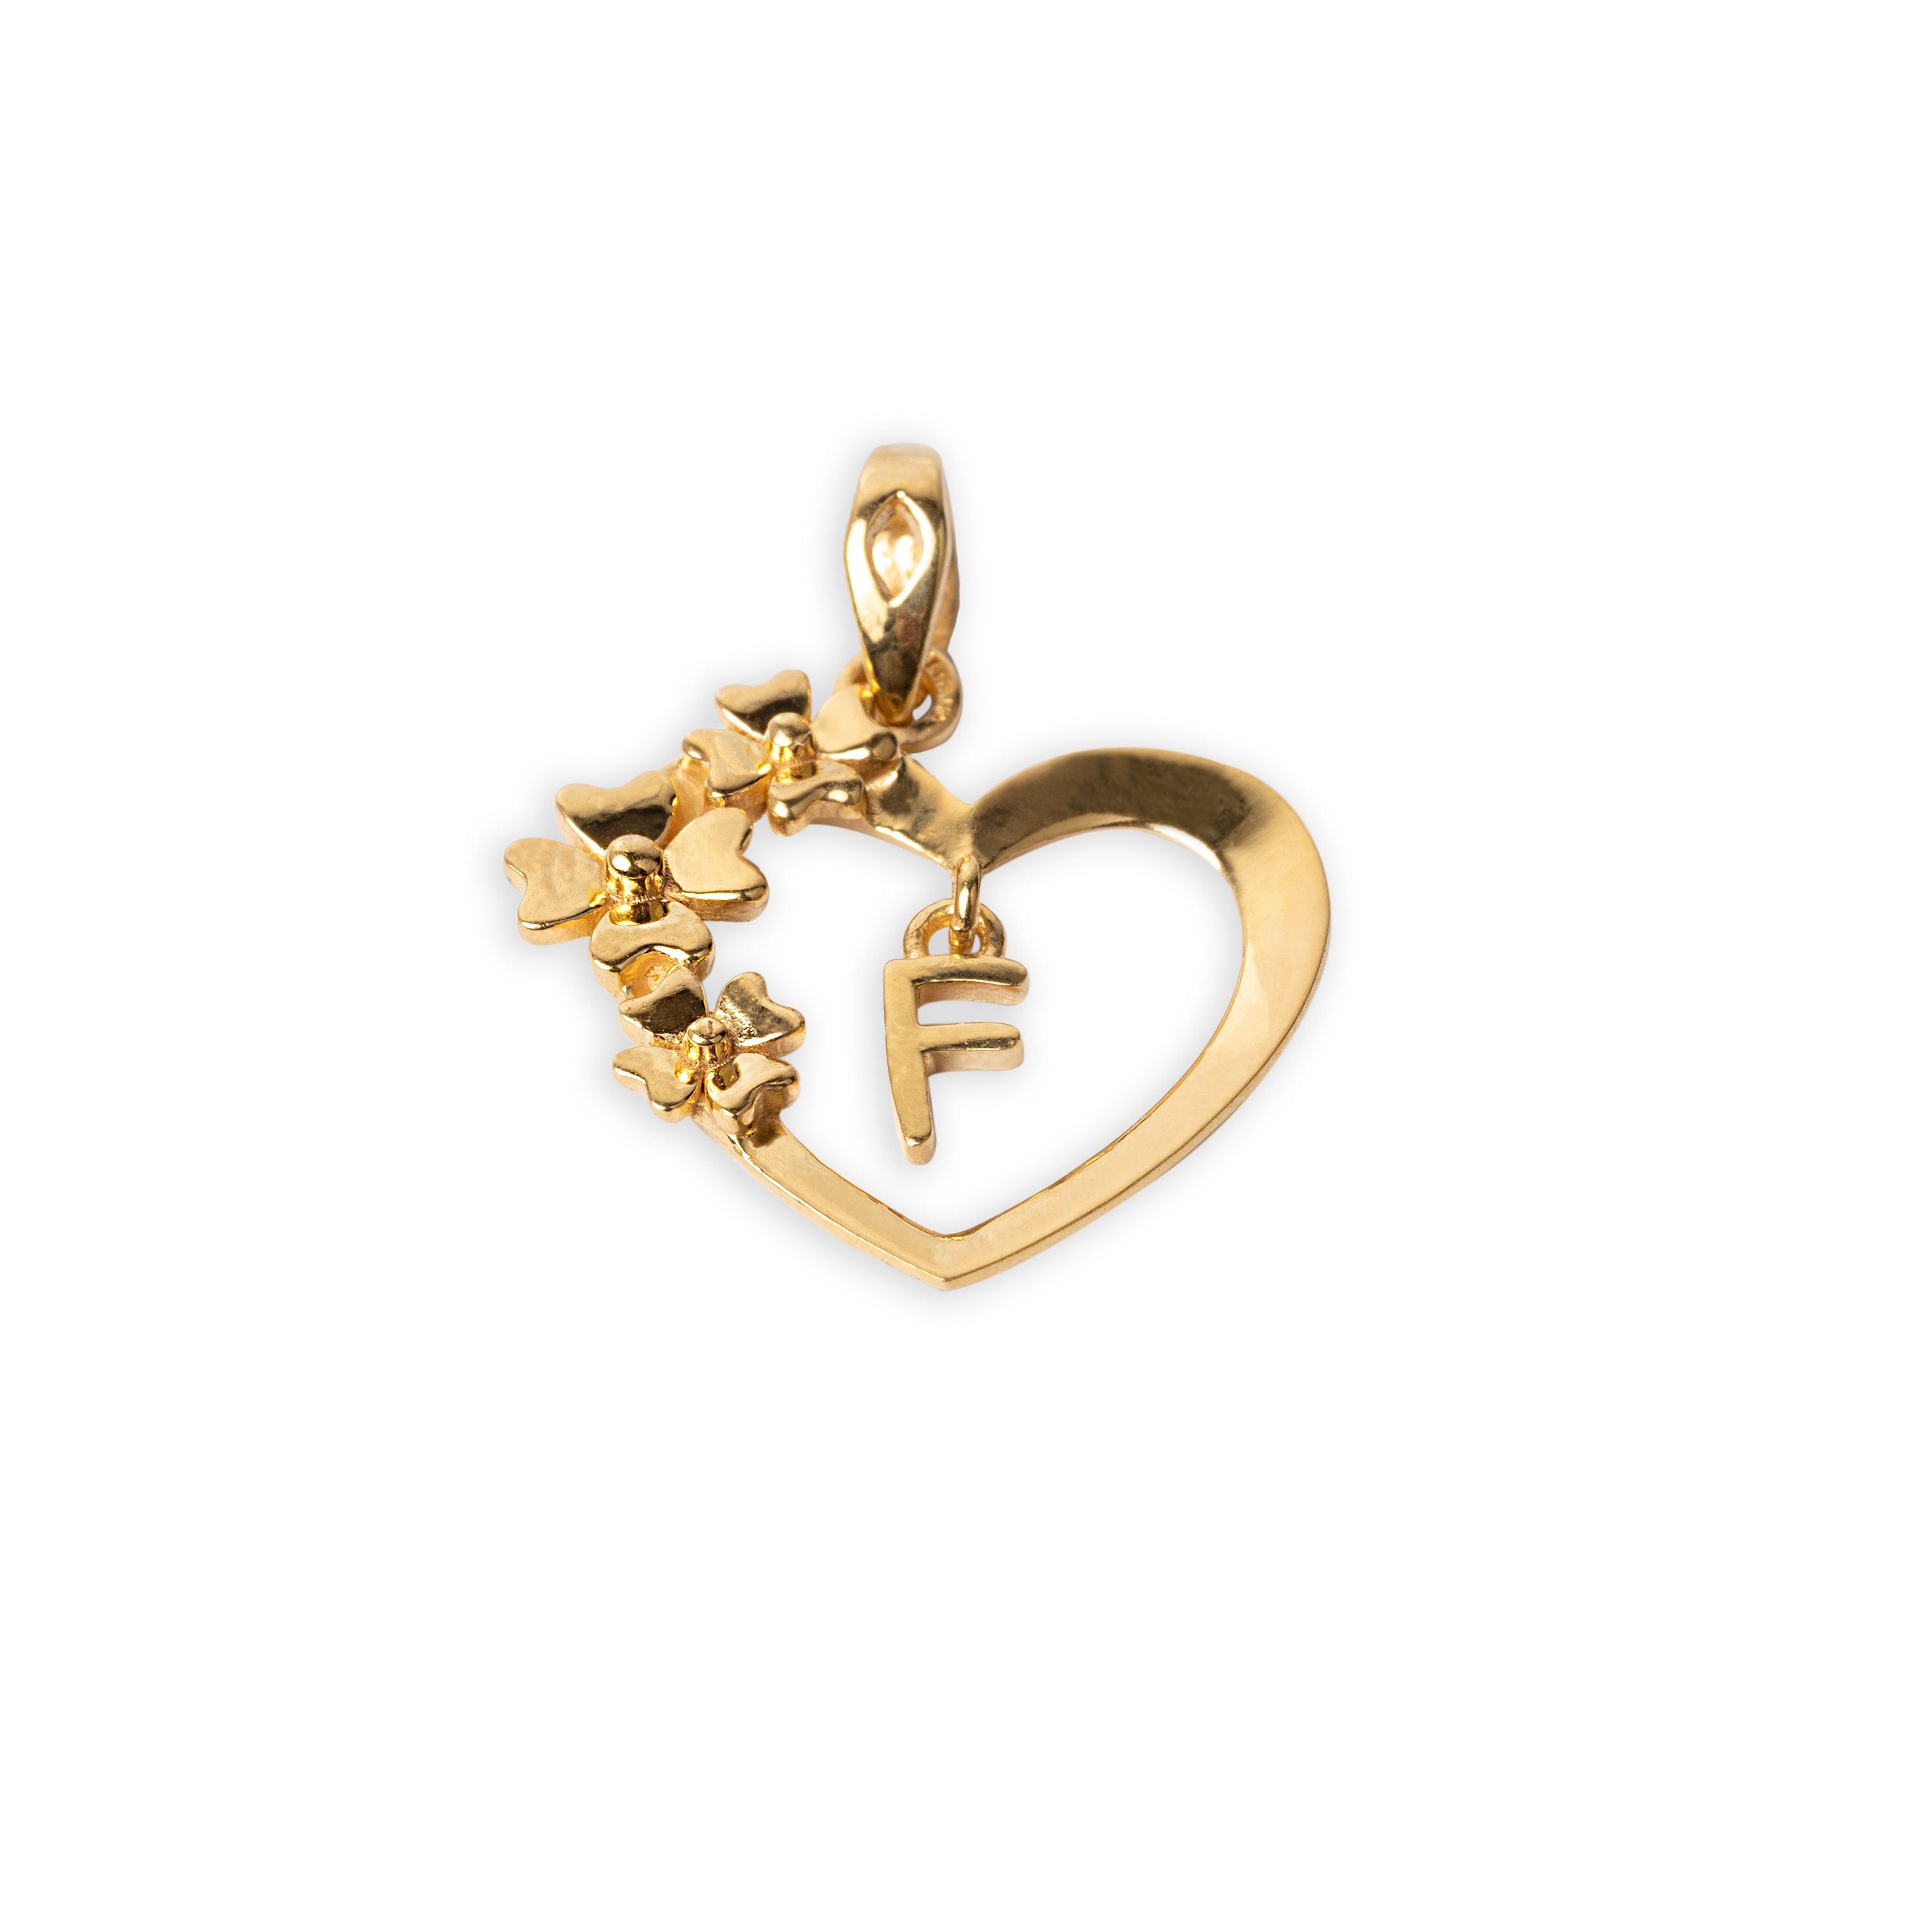 'F' 22ct Gold Heart Shape Initial Pendant with Flower Design P-7035-F - Minar Jewellers